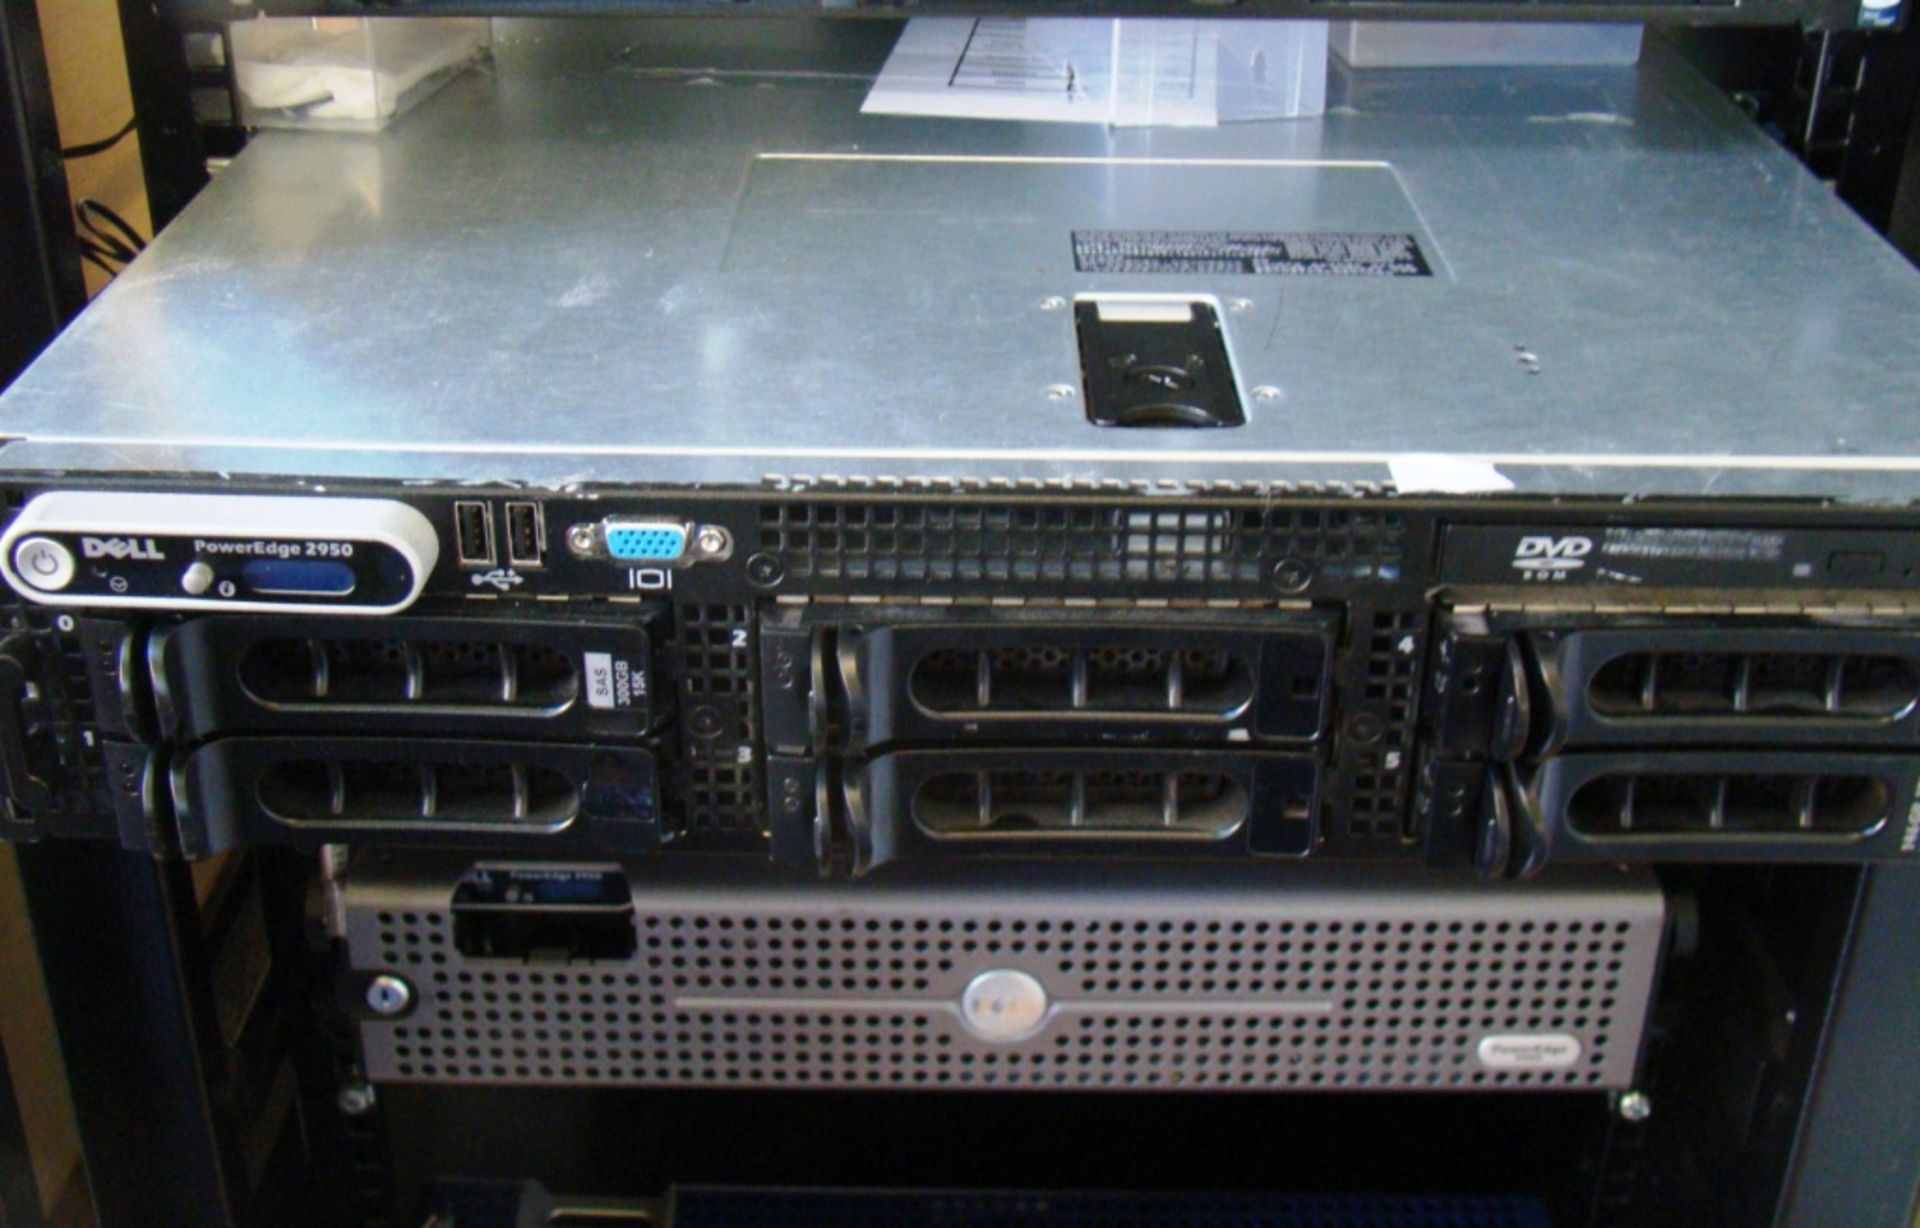 Dell 2950 Poweredge 2 * 3.00Ghz Quad Core 1333Mhz 32GB Memory 667Mhz 1* 132 GB HDD, 1 * 27